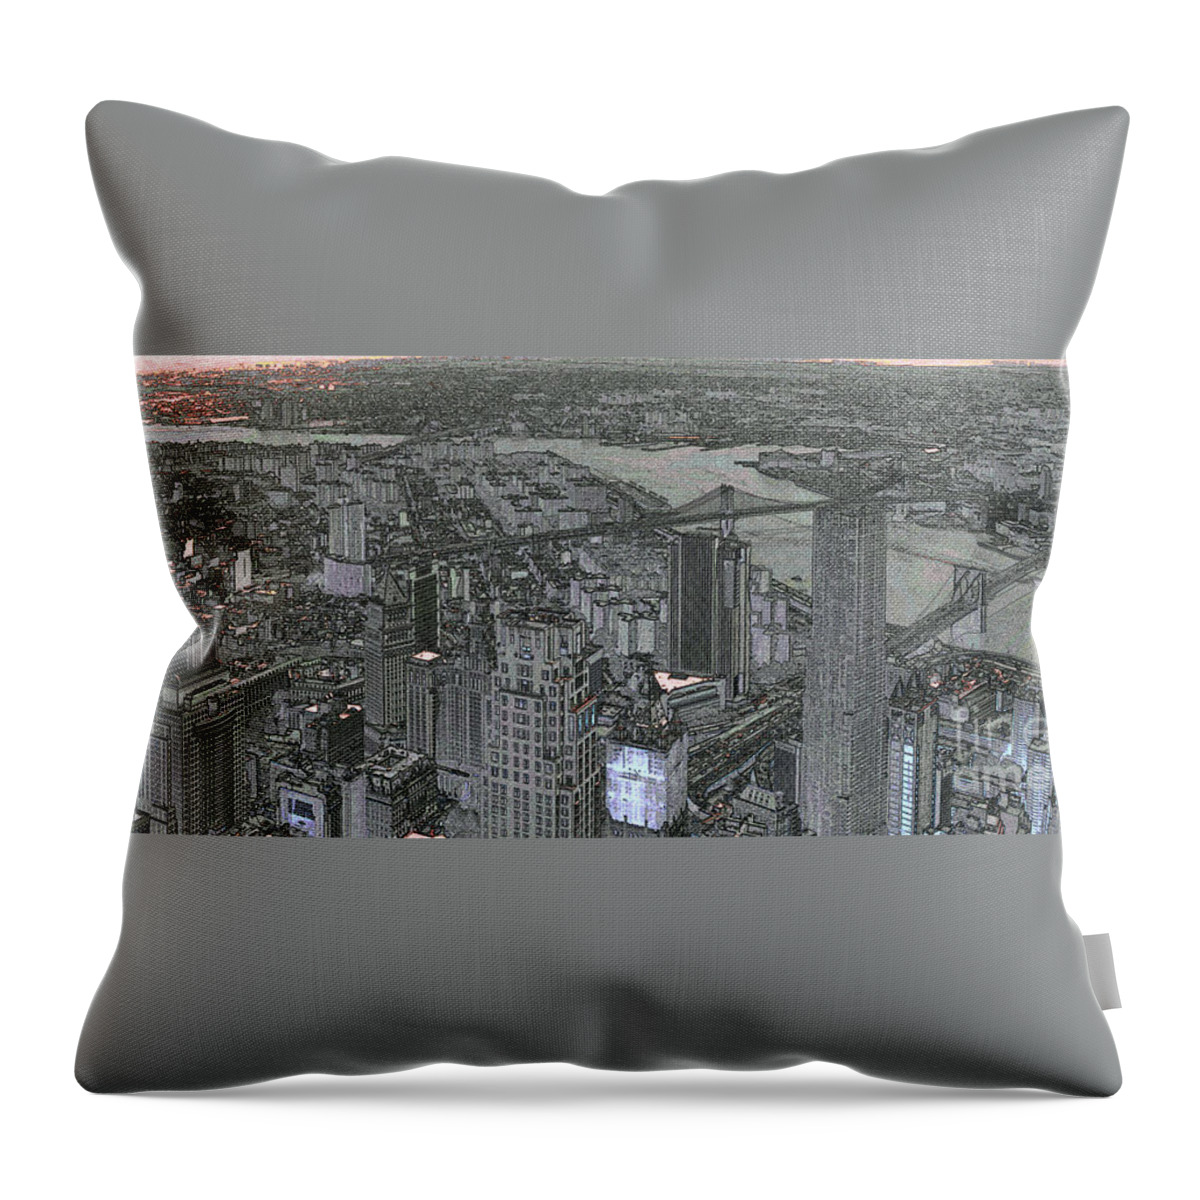 Abstract Throw Pillow featuring the digital art Metropolis by Scott Evers